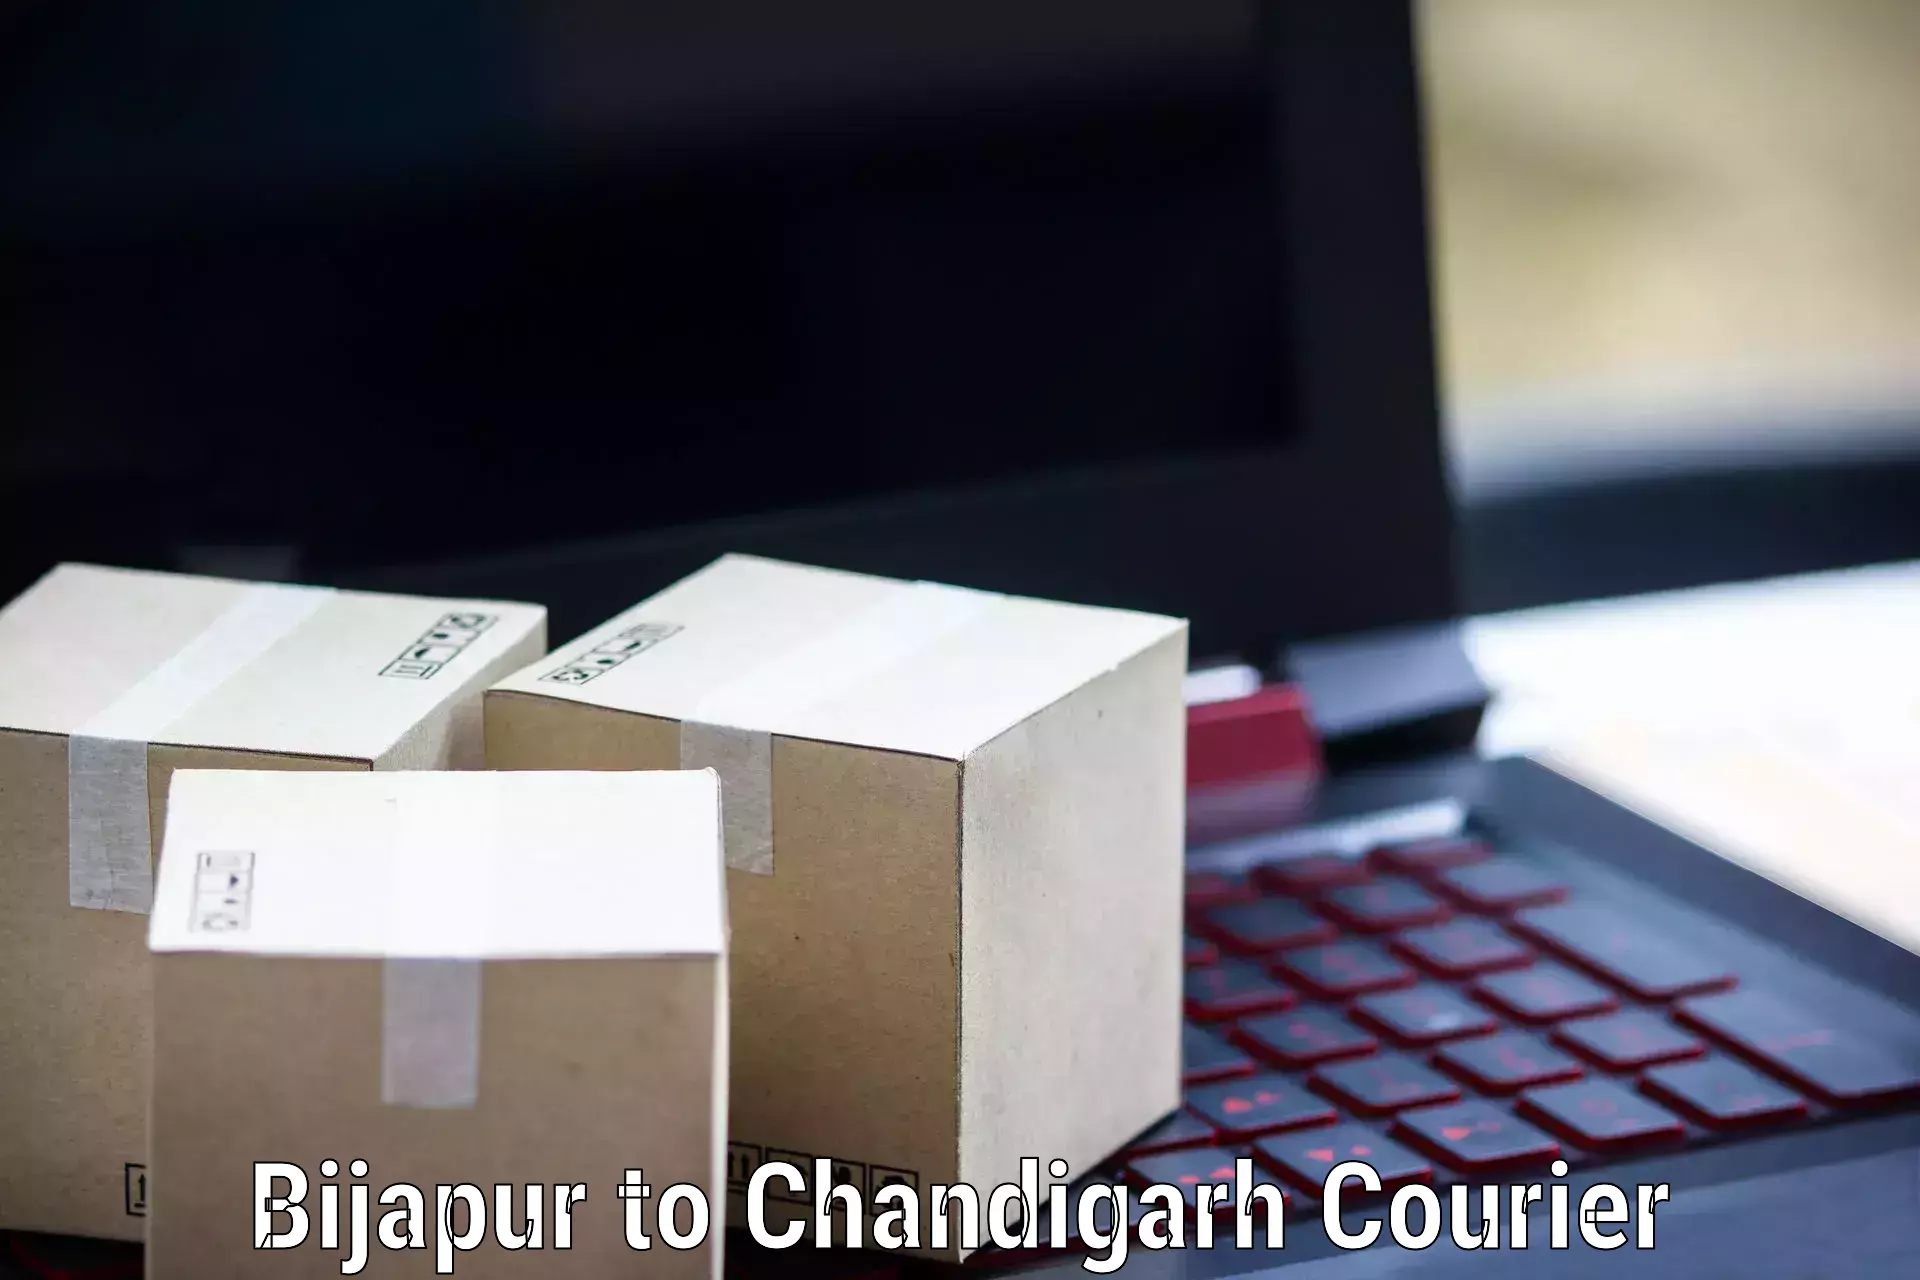 Reliable delivery network Bijapur to Chandigarh